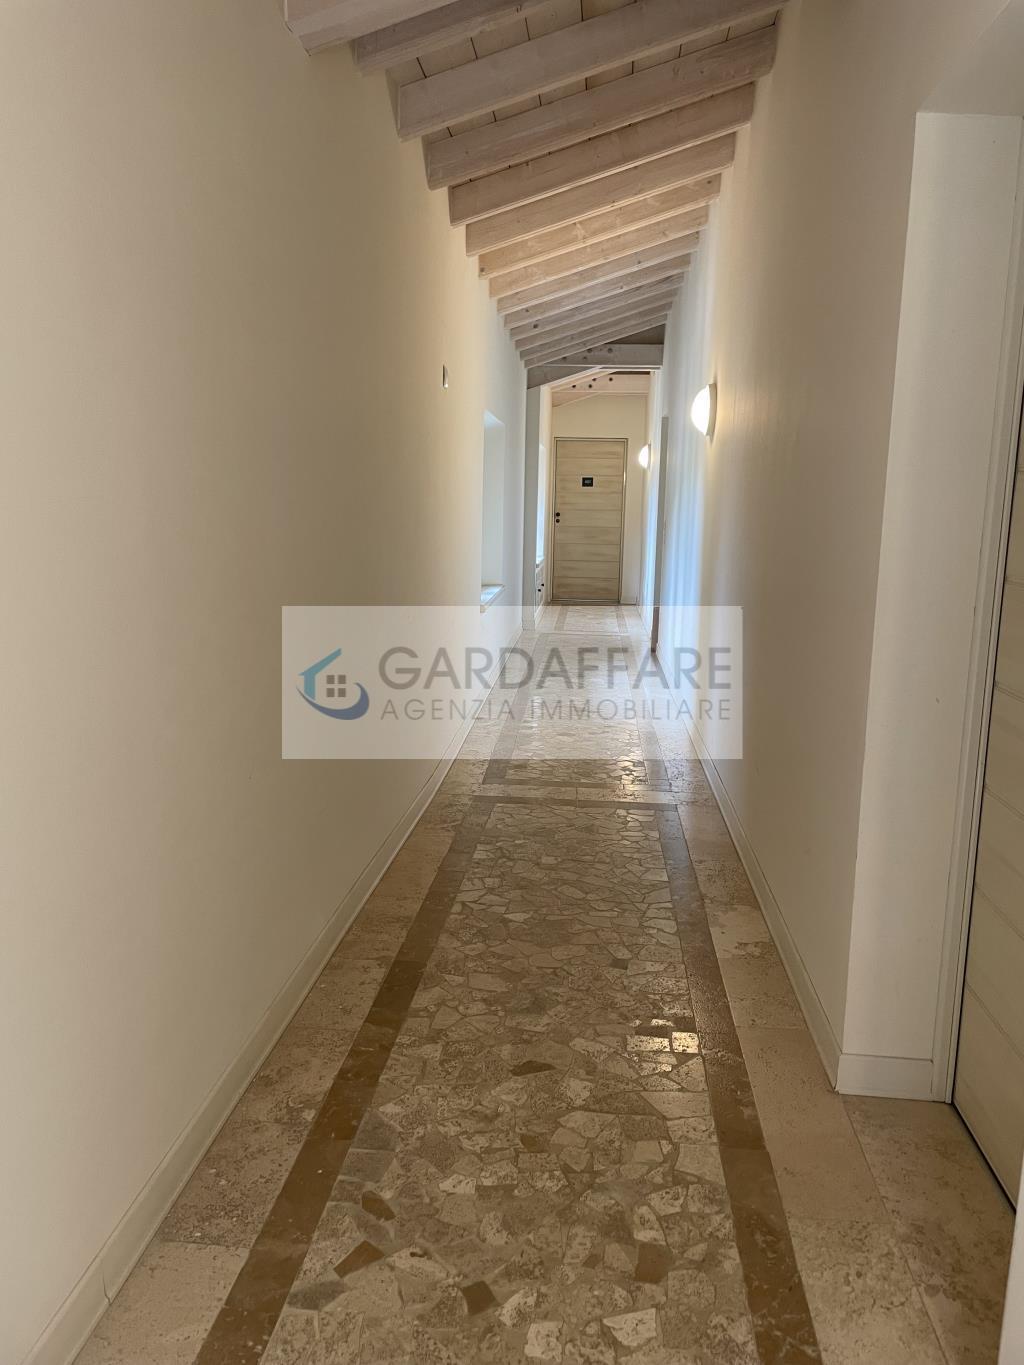 Flat Luxury Properties for Buy in Pozzolengo - Cod. h19-22-39